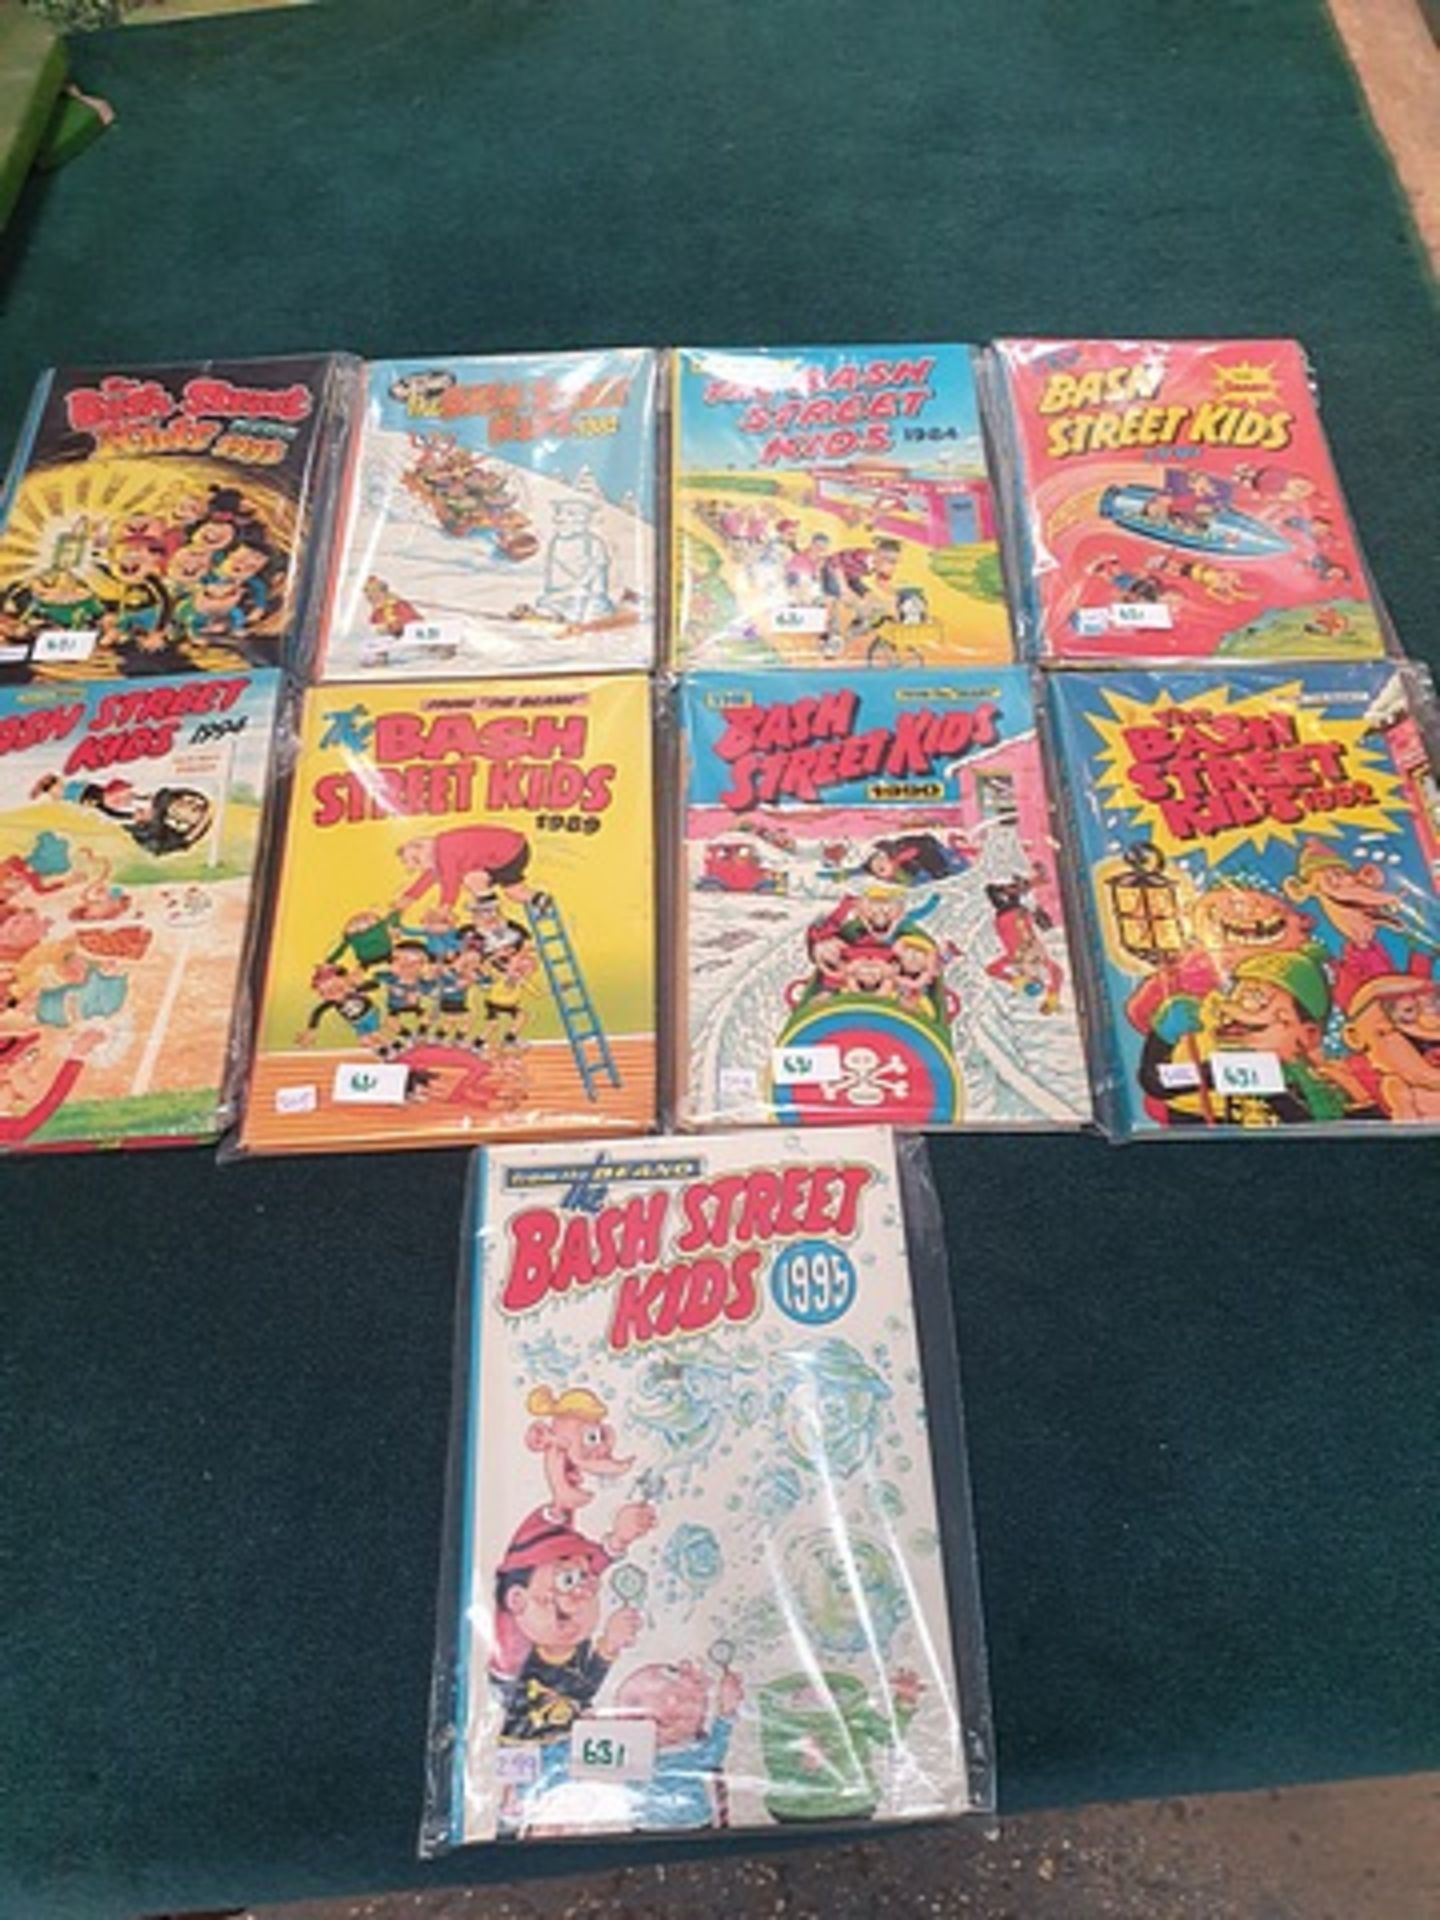 9 x D.C. Thomson and Co. The Bash Street Kids Annuals 1982,1984,1989,1990,1991,1992,1993,1994 and